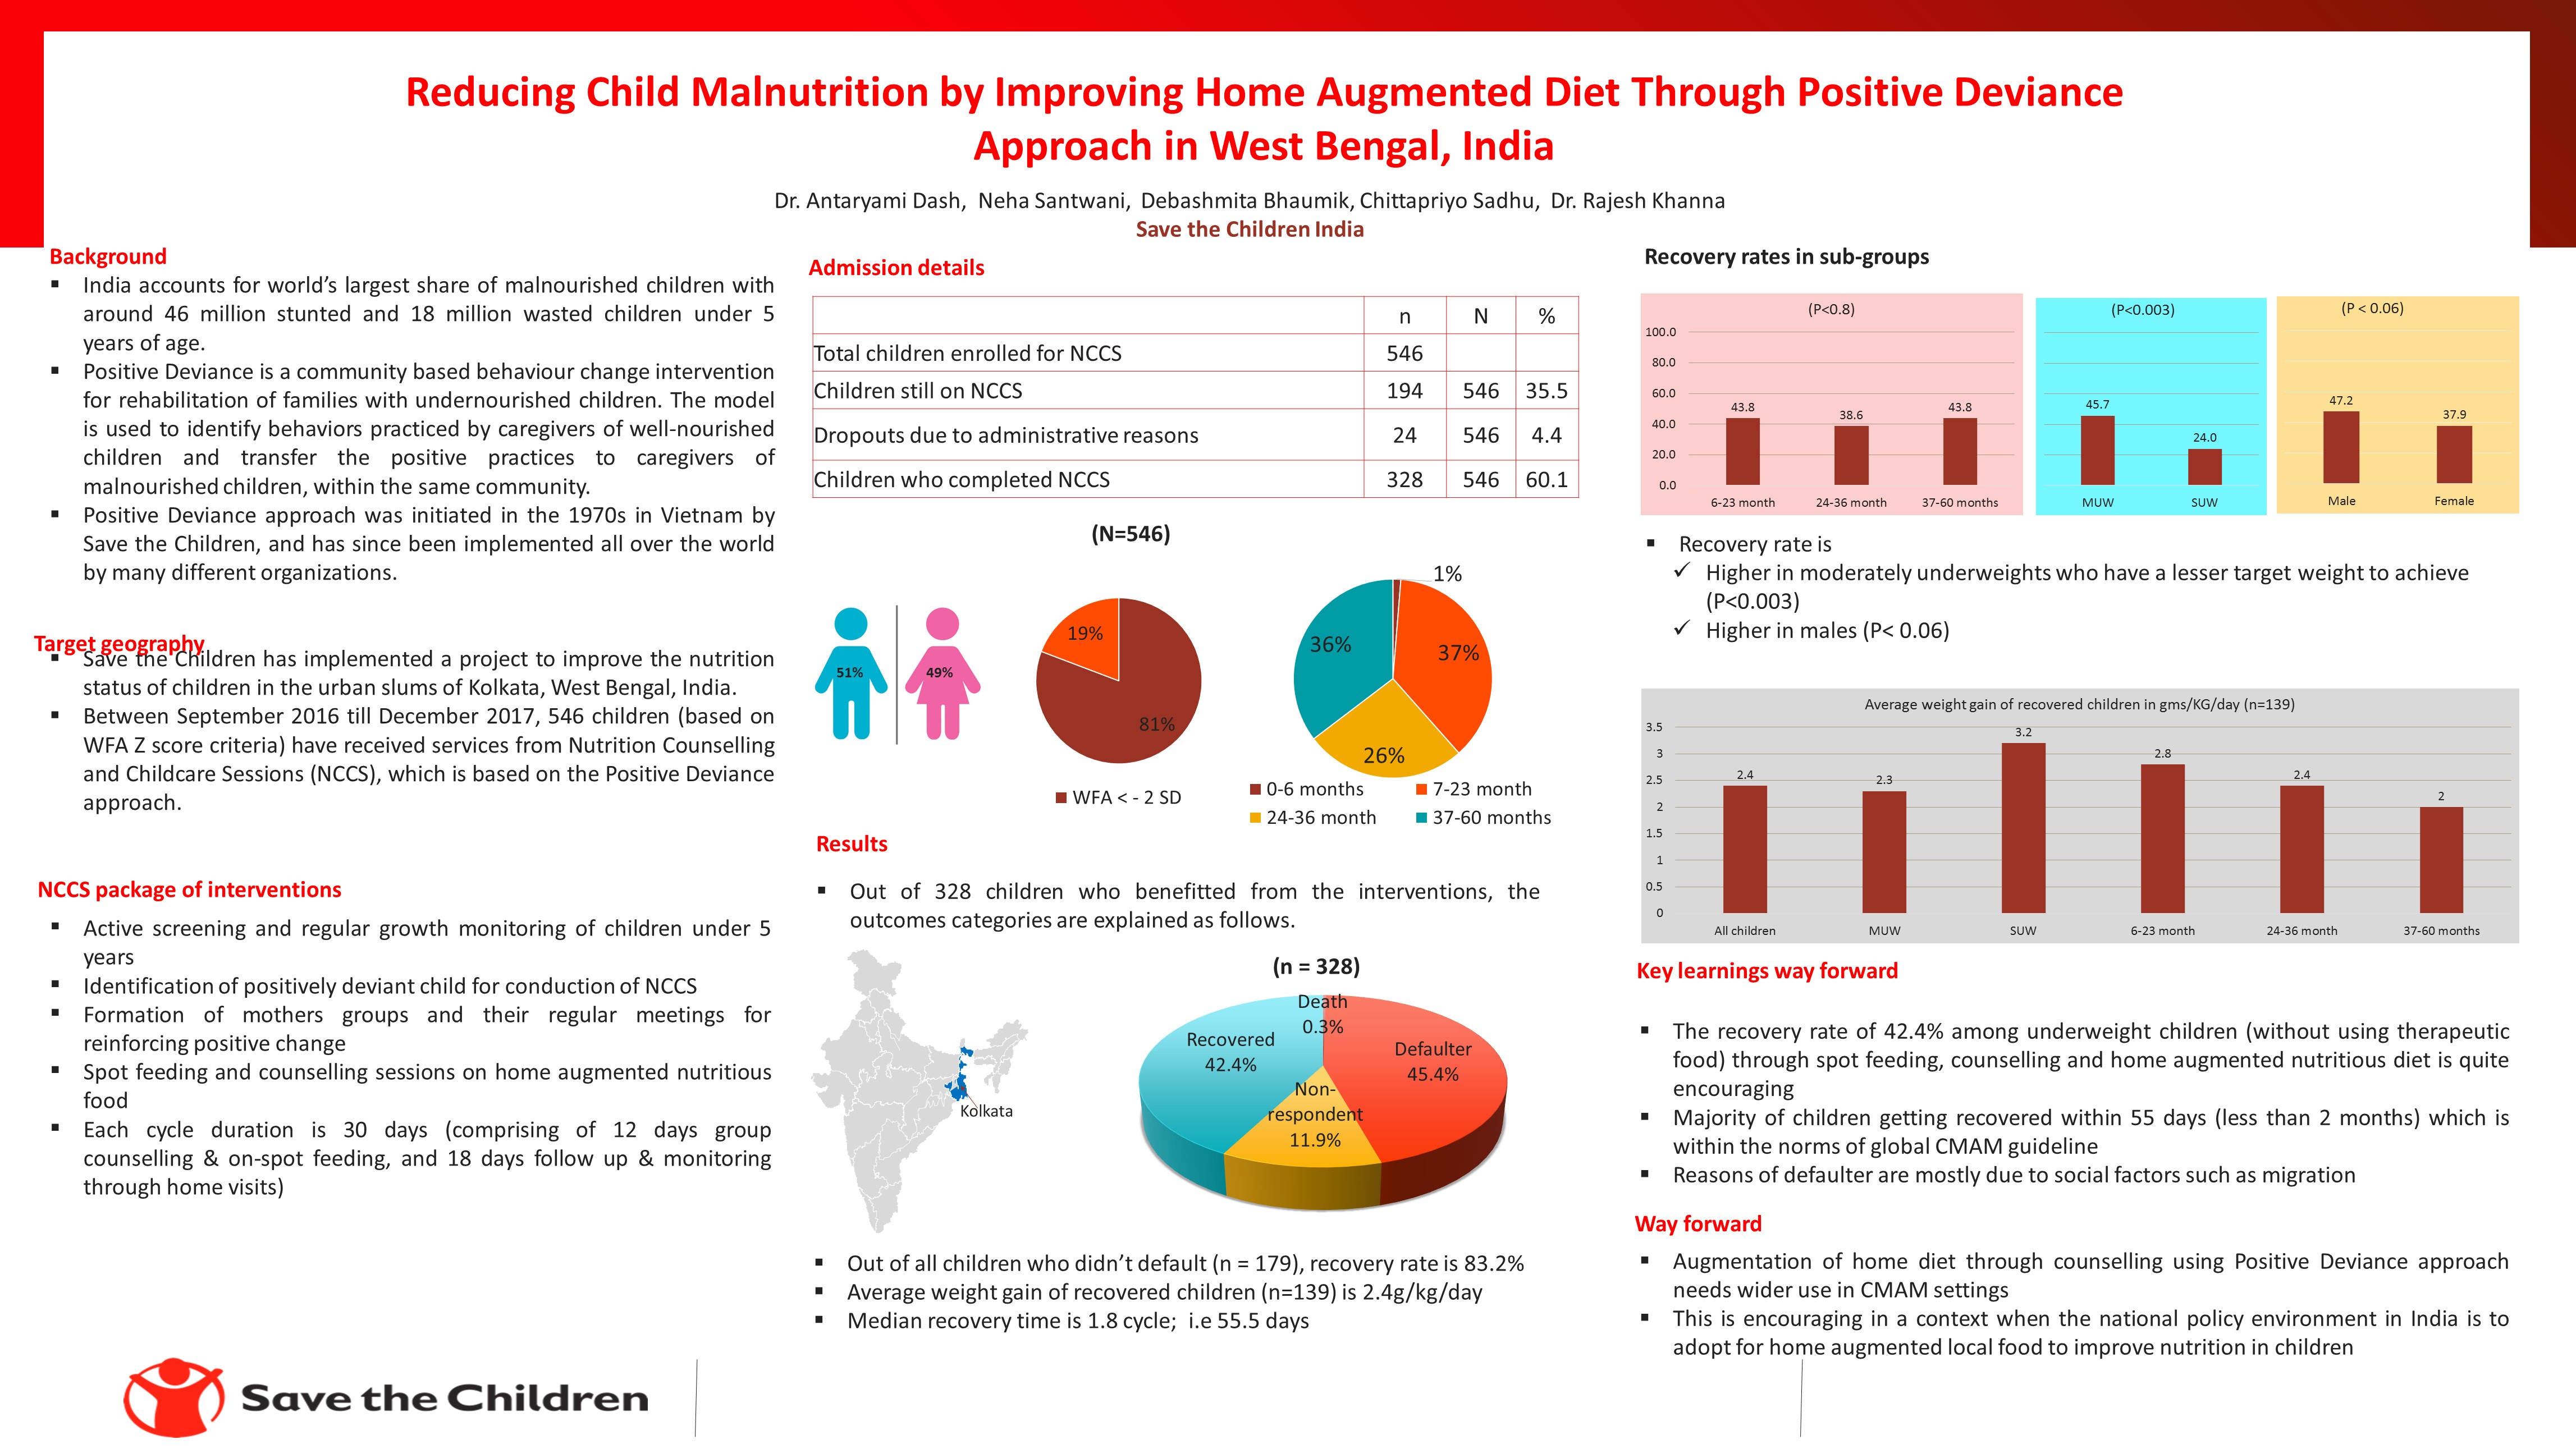 Reducing Child Malnutrition by Improving Home Augmented Diet Through Positive Deviance Approach in West Bengal, India